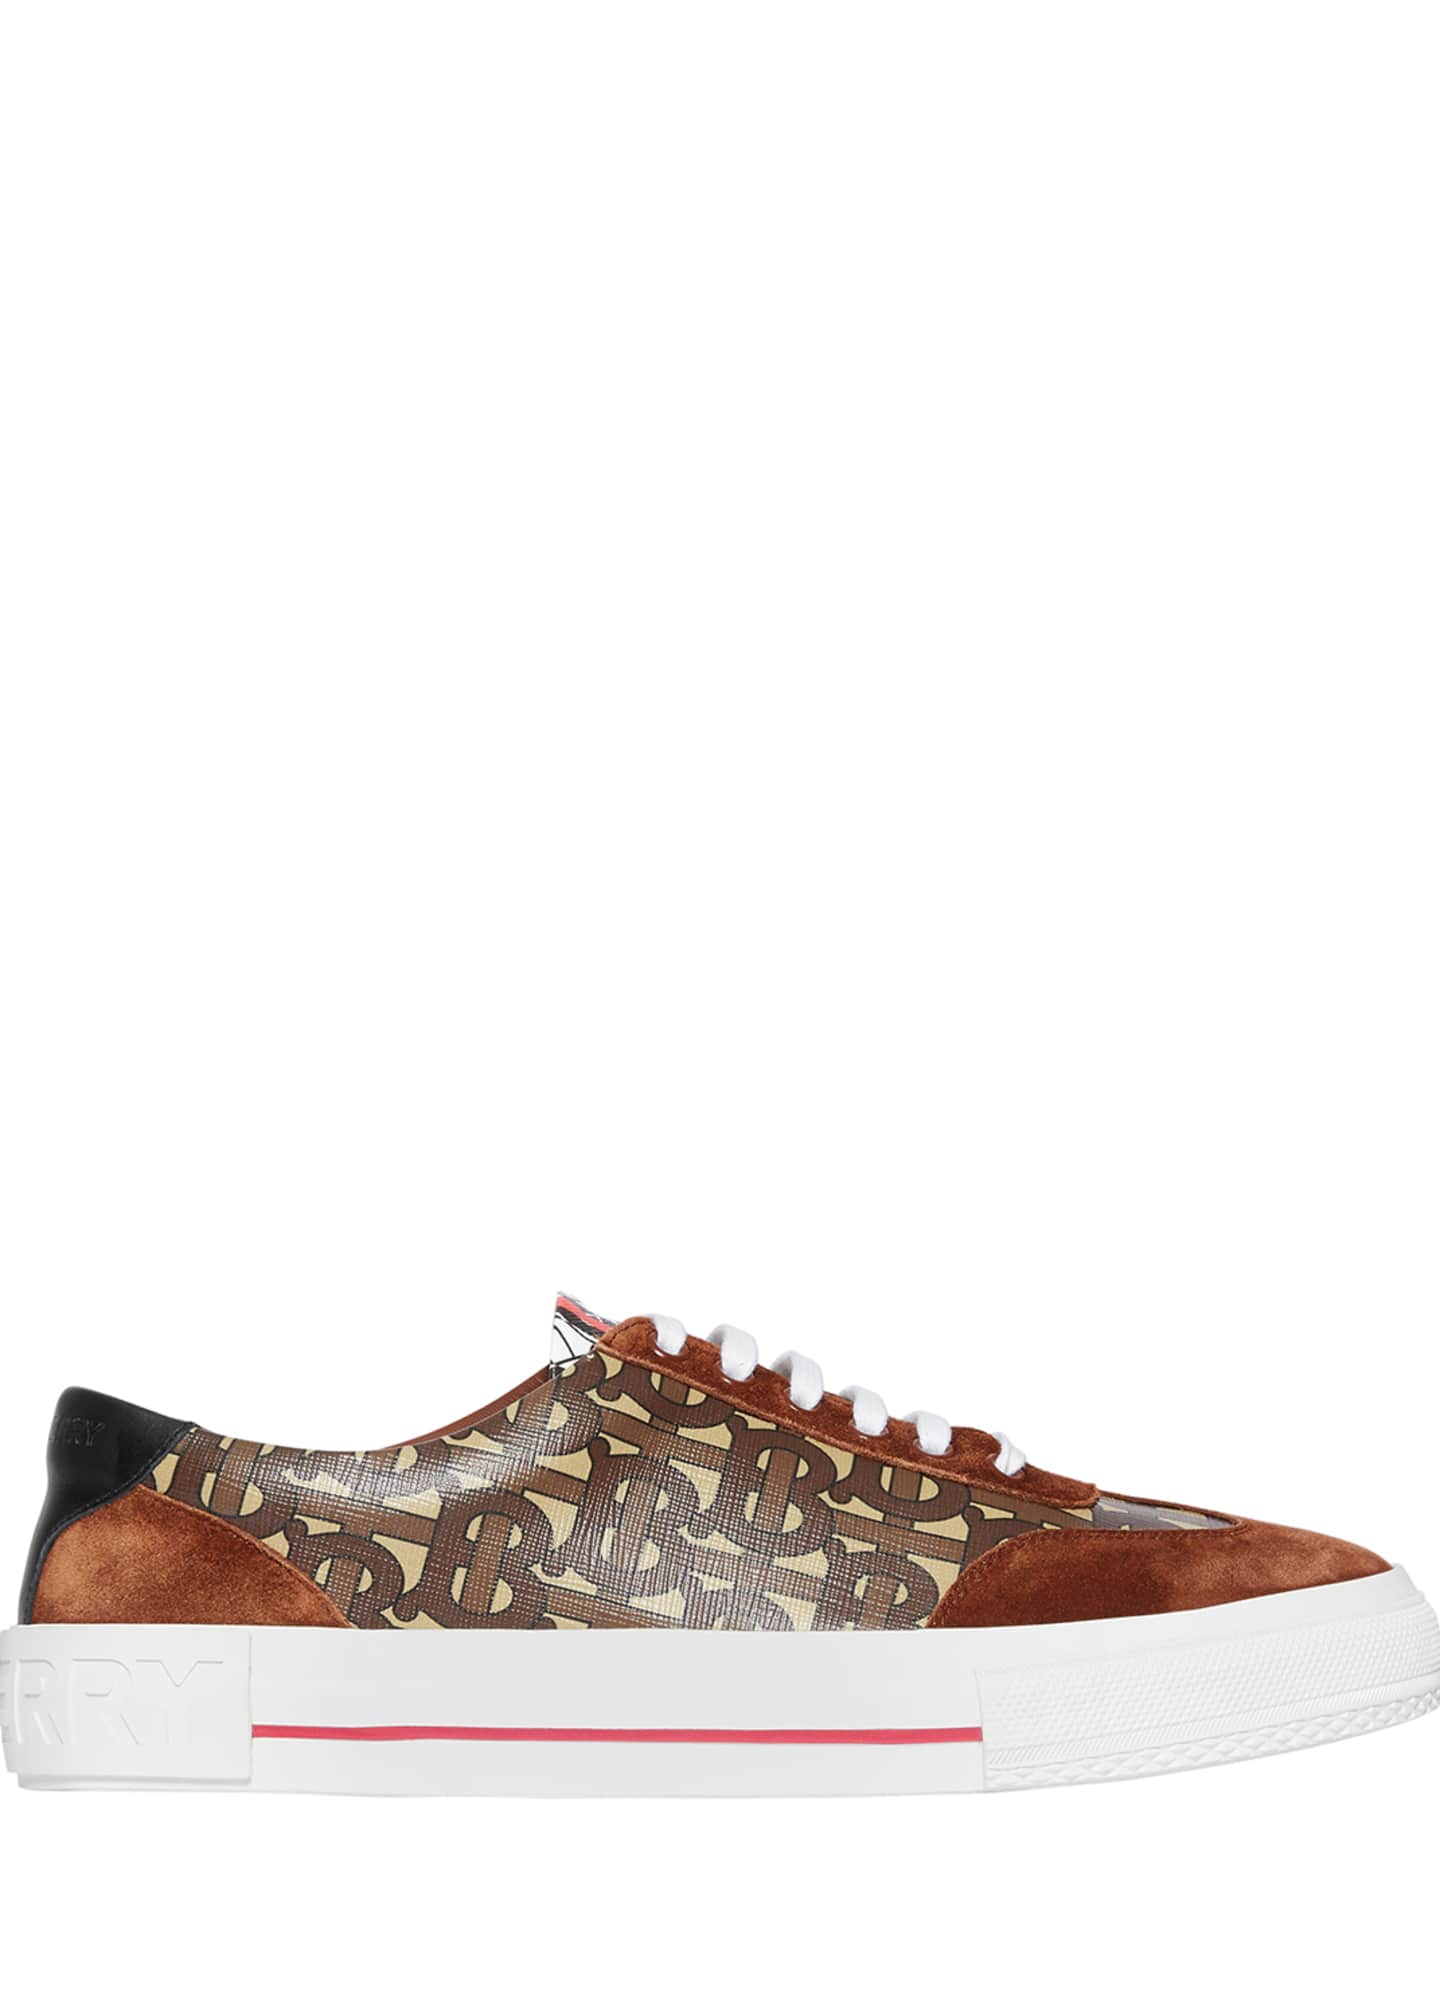 Burberry Men's Nelson TB Monogram Sneakers with Suede Trim - Bergdorf ...